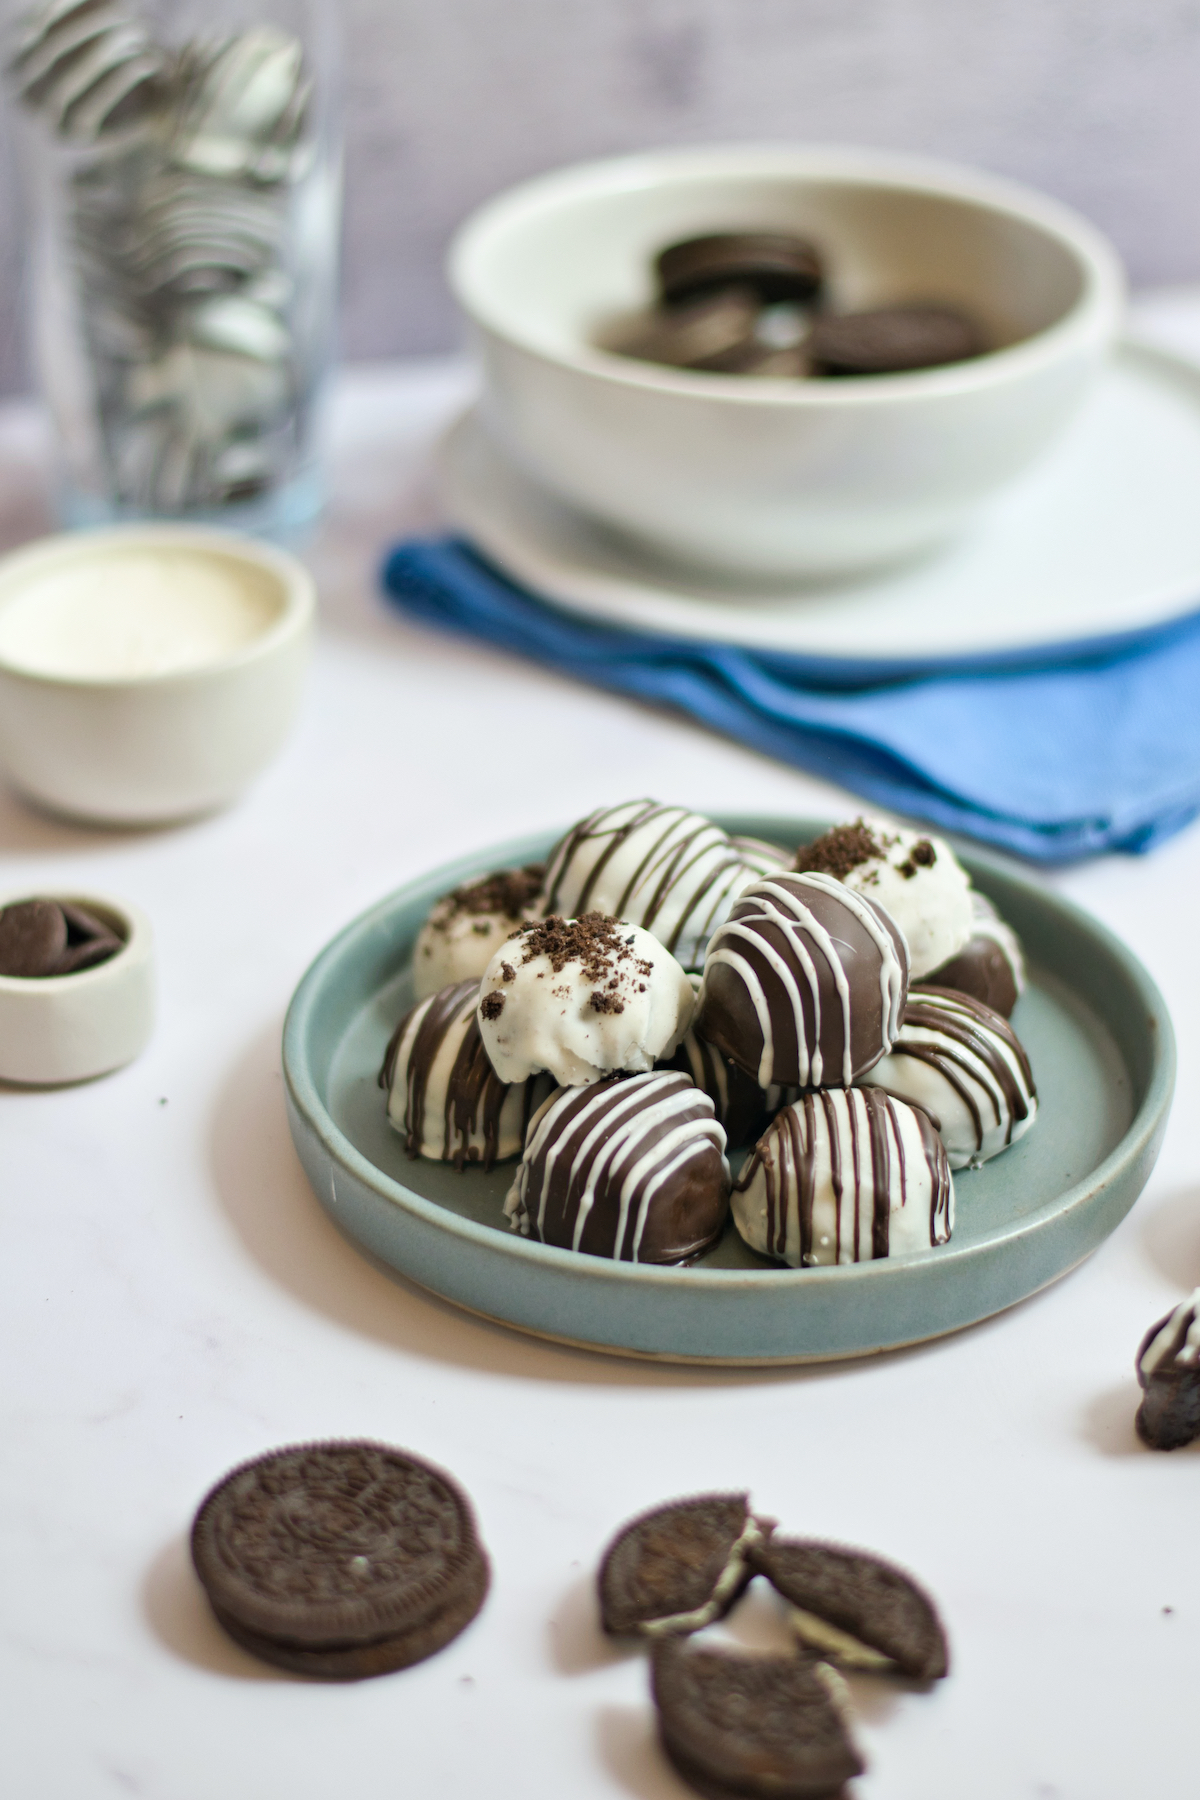 OREO Cake Balls on a teal plate on a white table.